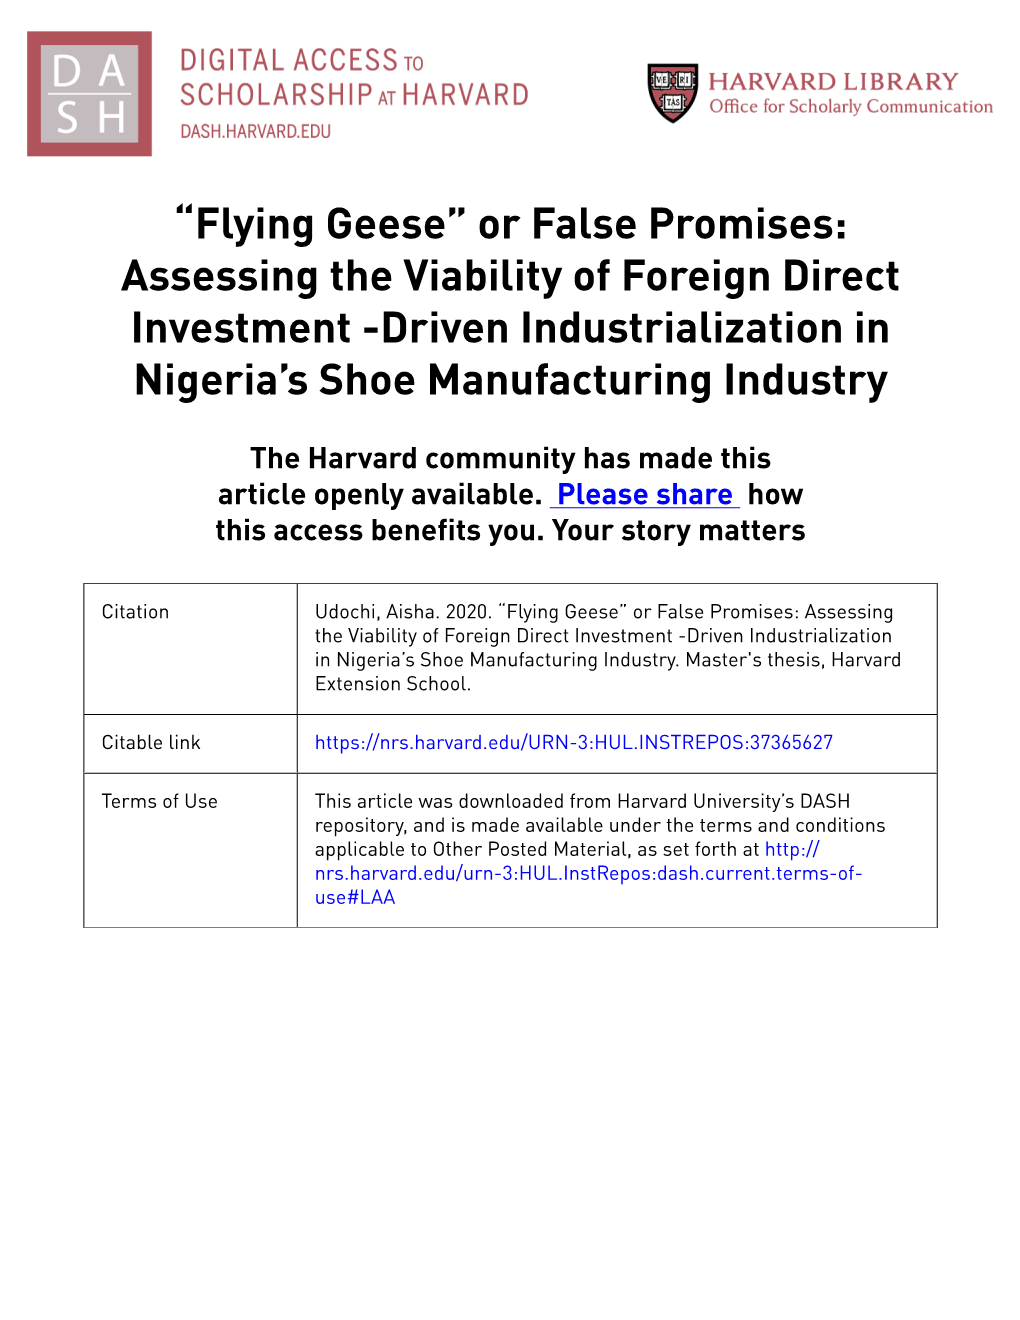 Flying Geese” Or False Promises: Assessing the Viability of Foreign Direct Investment -Driven Industrialization in Nigeria’S Shoe Manufacturing Industry